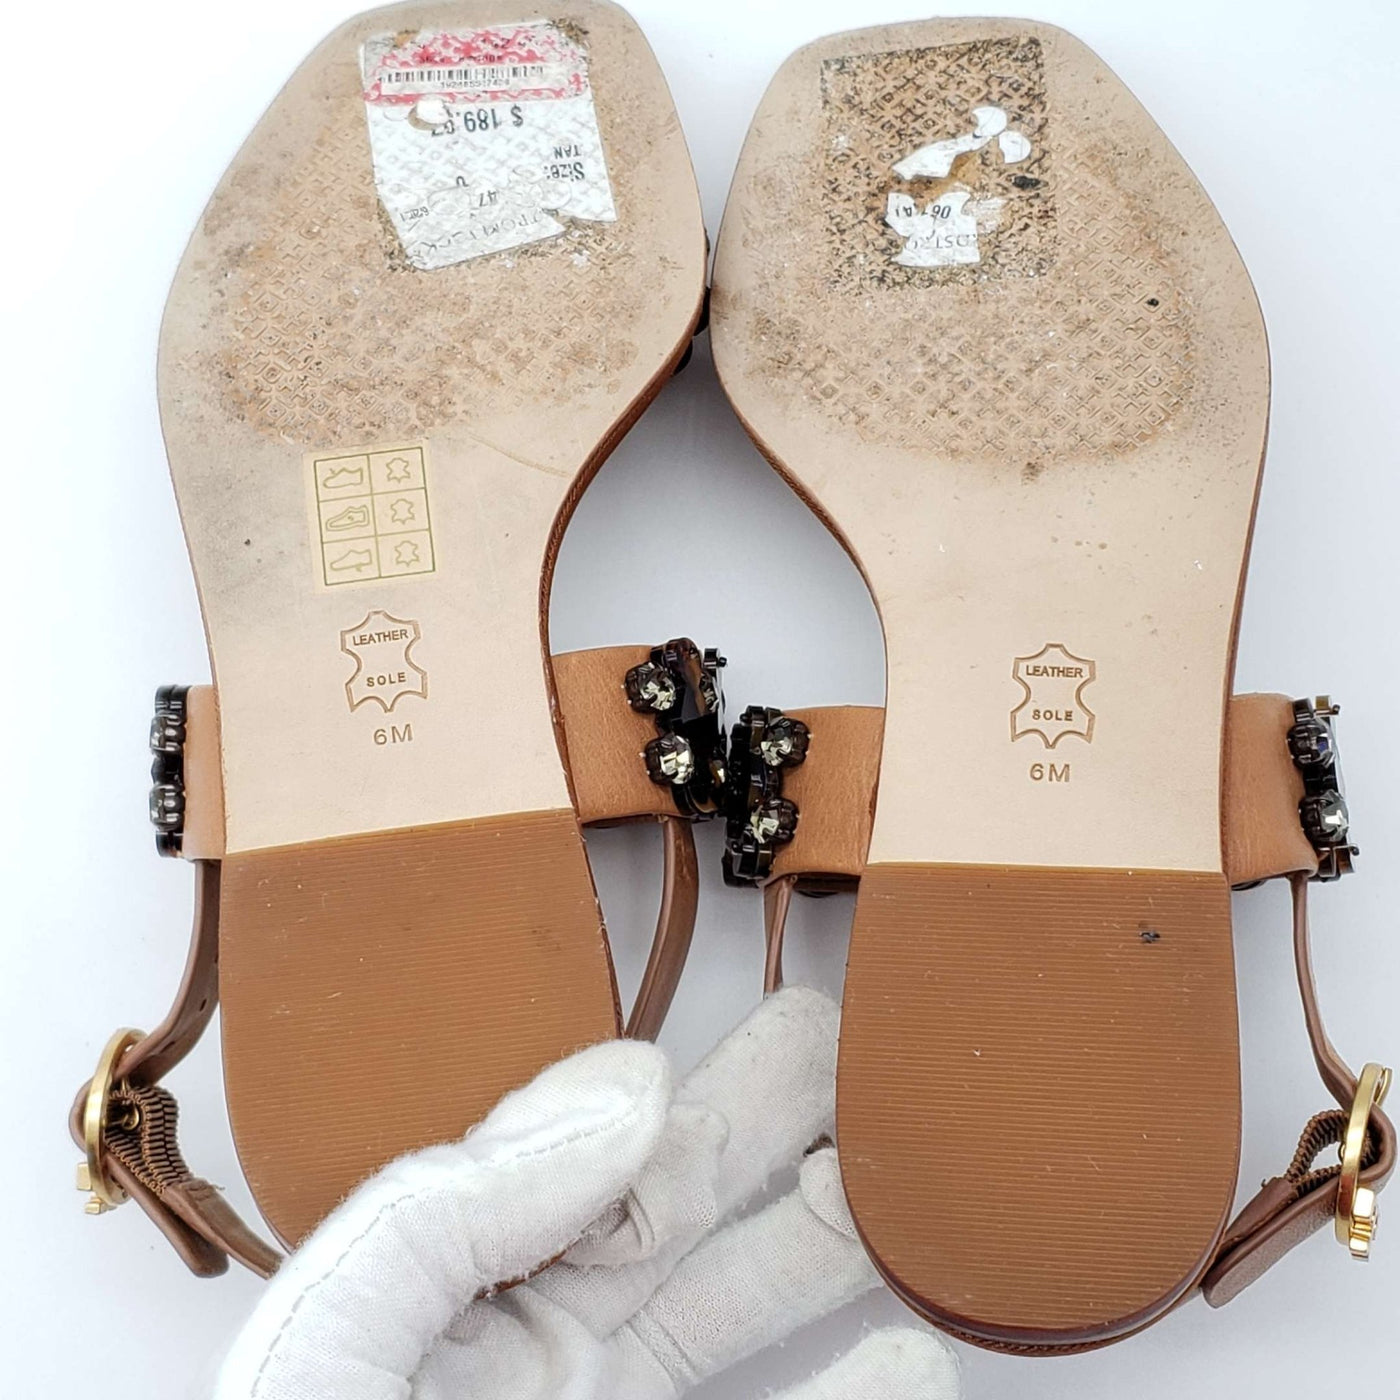 Tory Burch Brown Leather Sandal - Luxury Cheaper